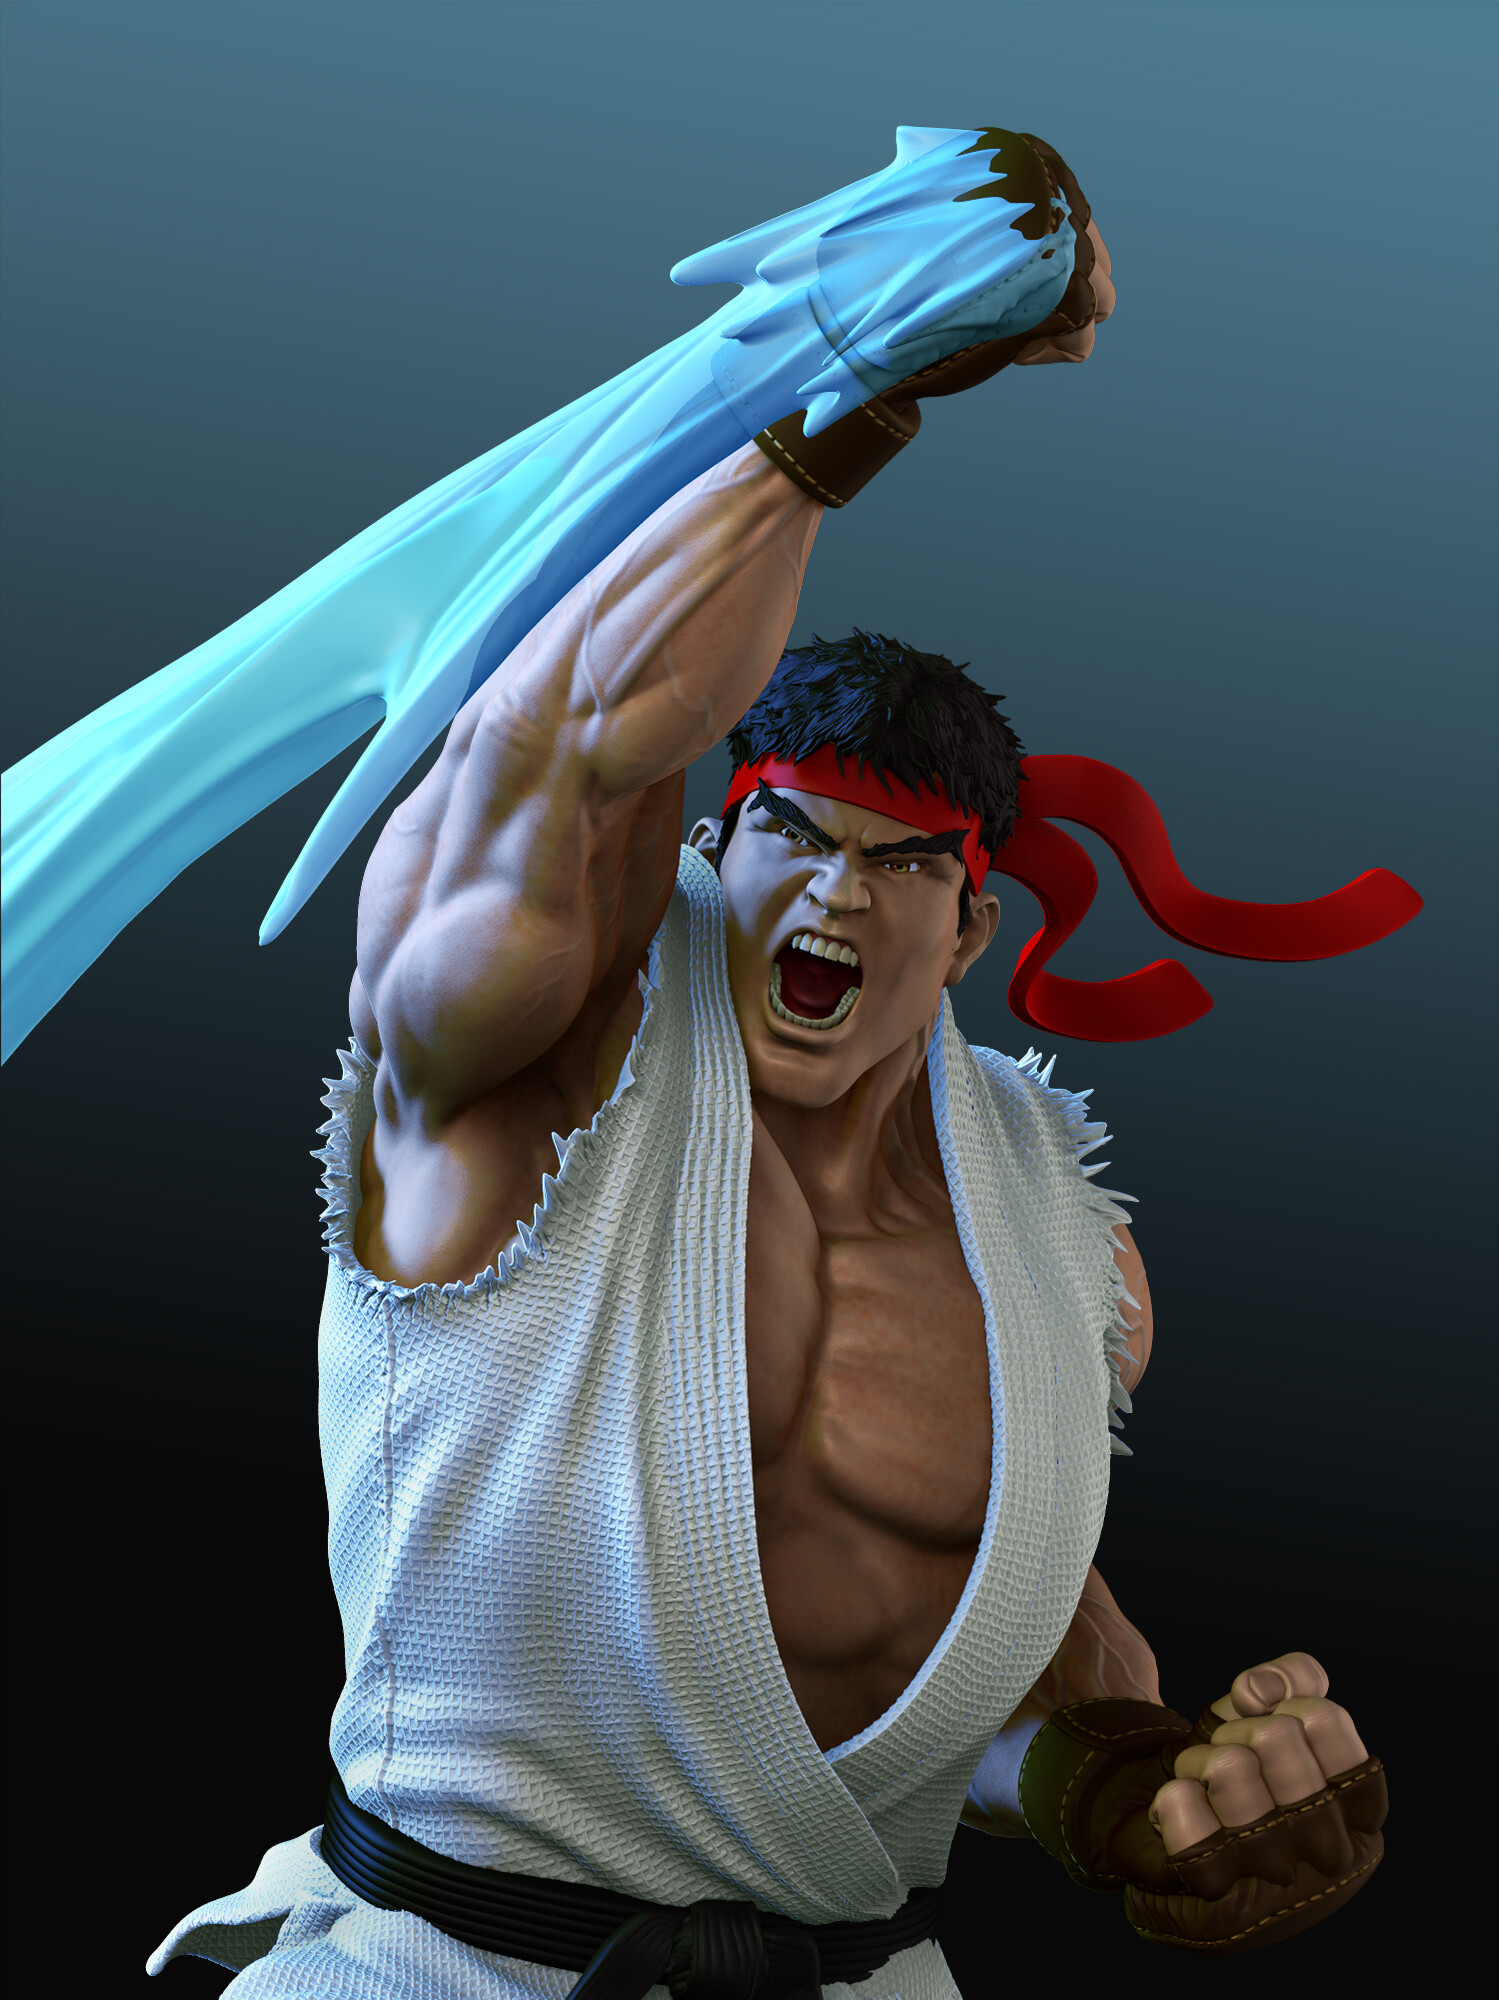 Anderson Soares3D - RYU - Street Fighter